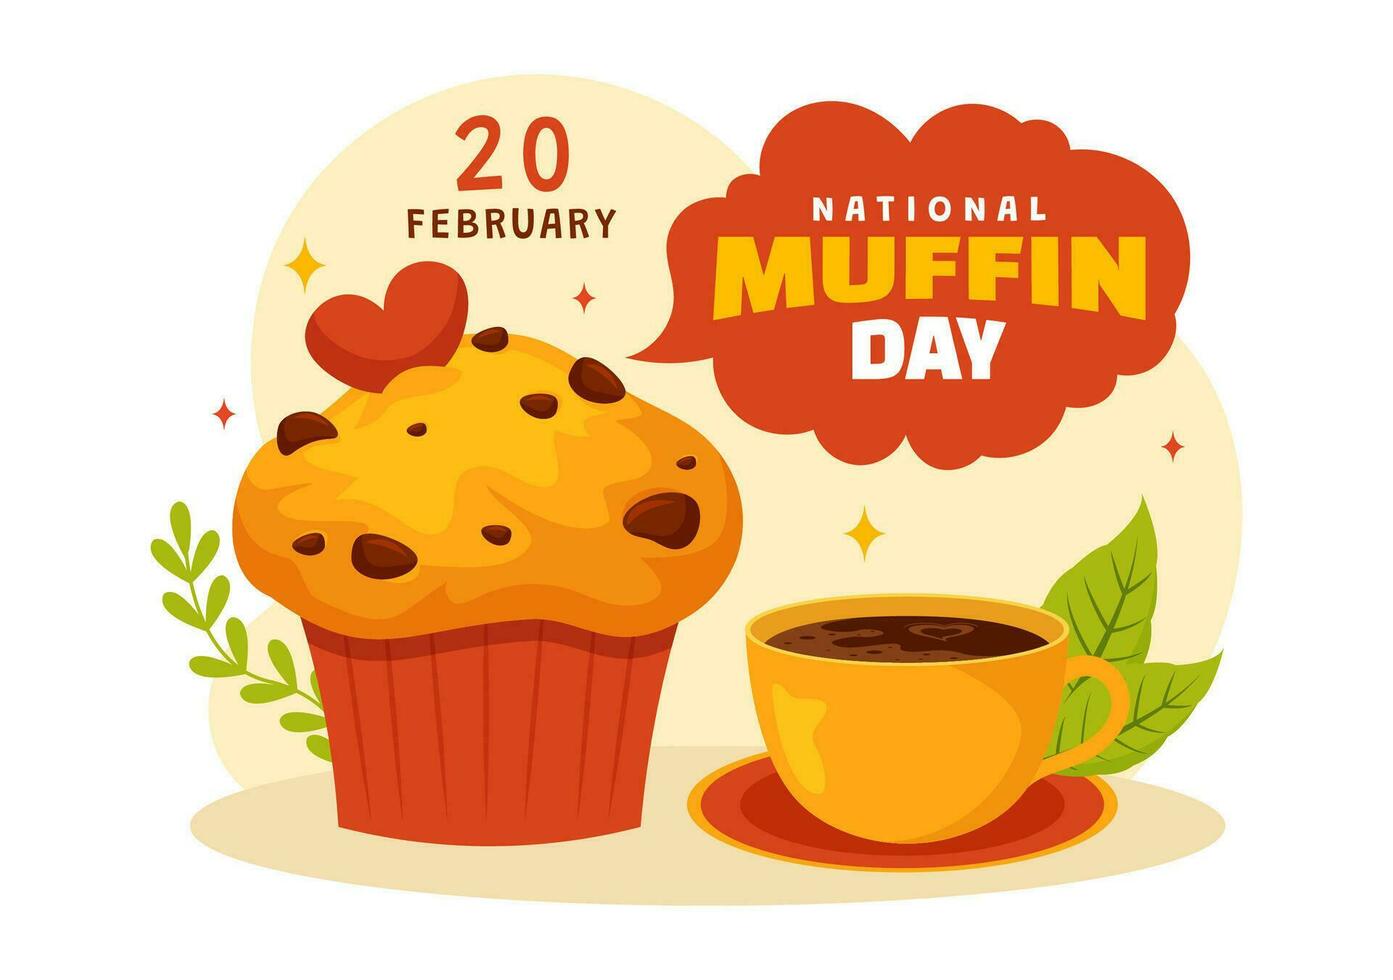 National Muffin Day Vector Illustration on February 20th with Chocolate Chip Food Classic Muffins Delicious in Flat Cartoon Illustration